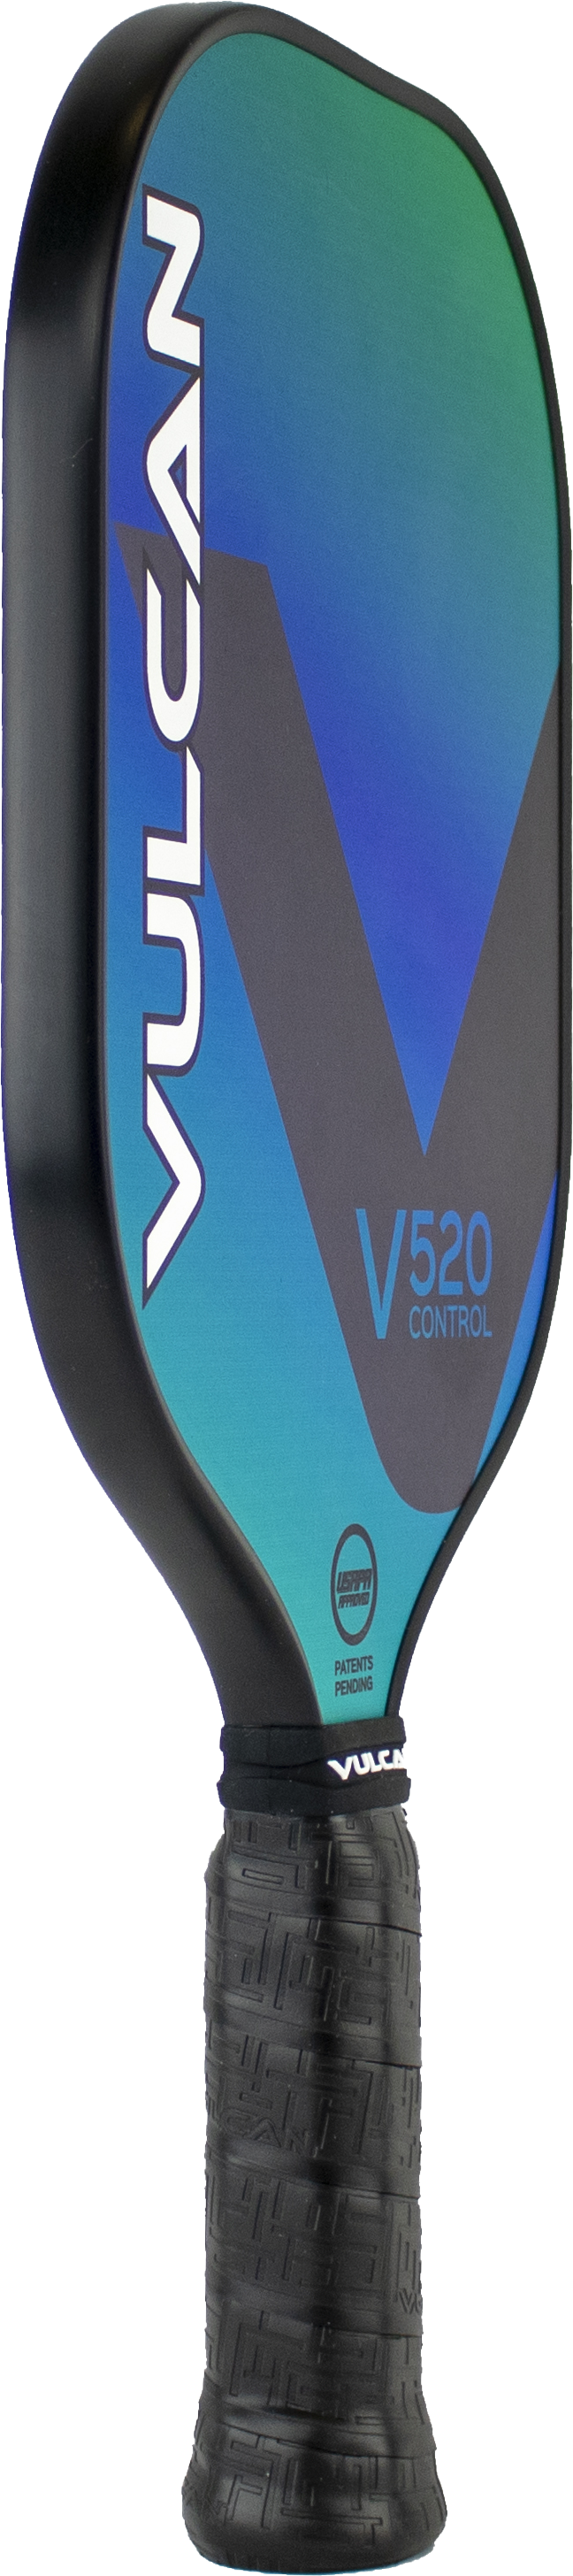 The Vulcan V520 Control Pickleball Paddle from Vulcan is shown on a white background.